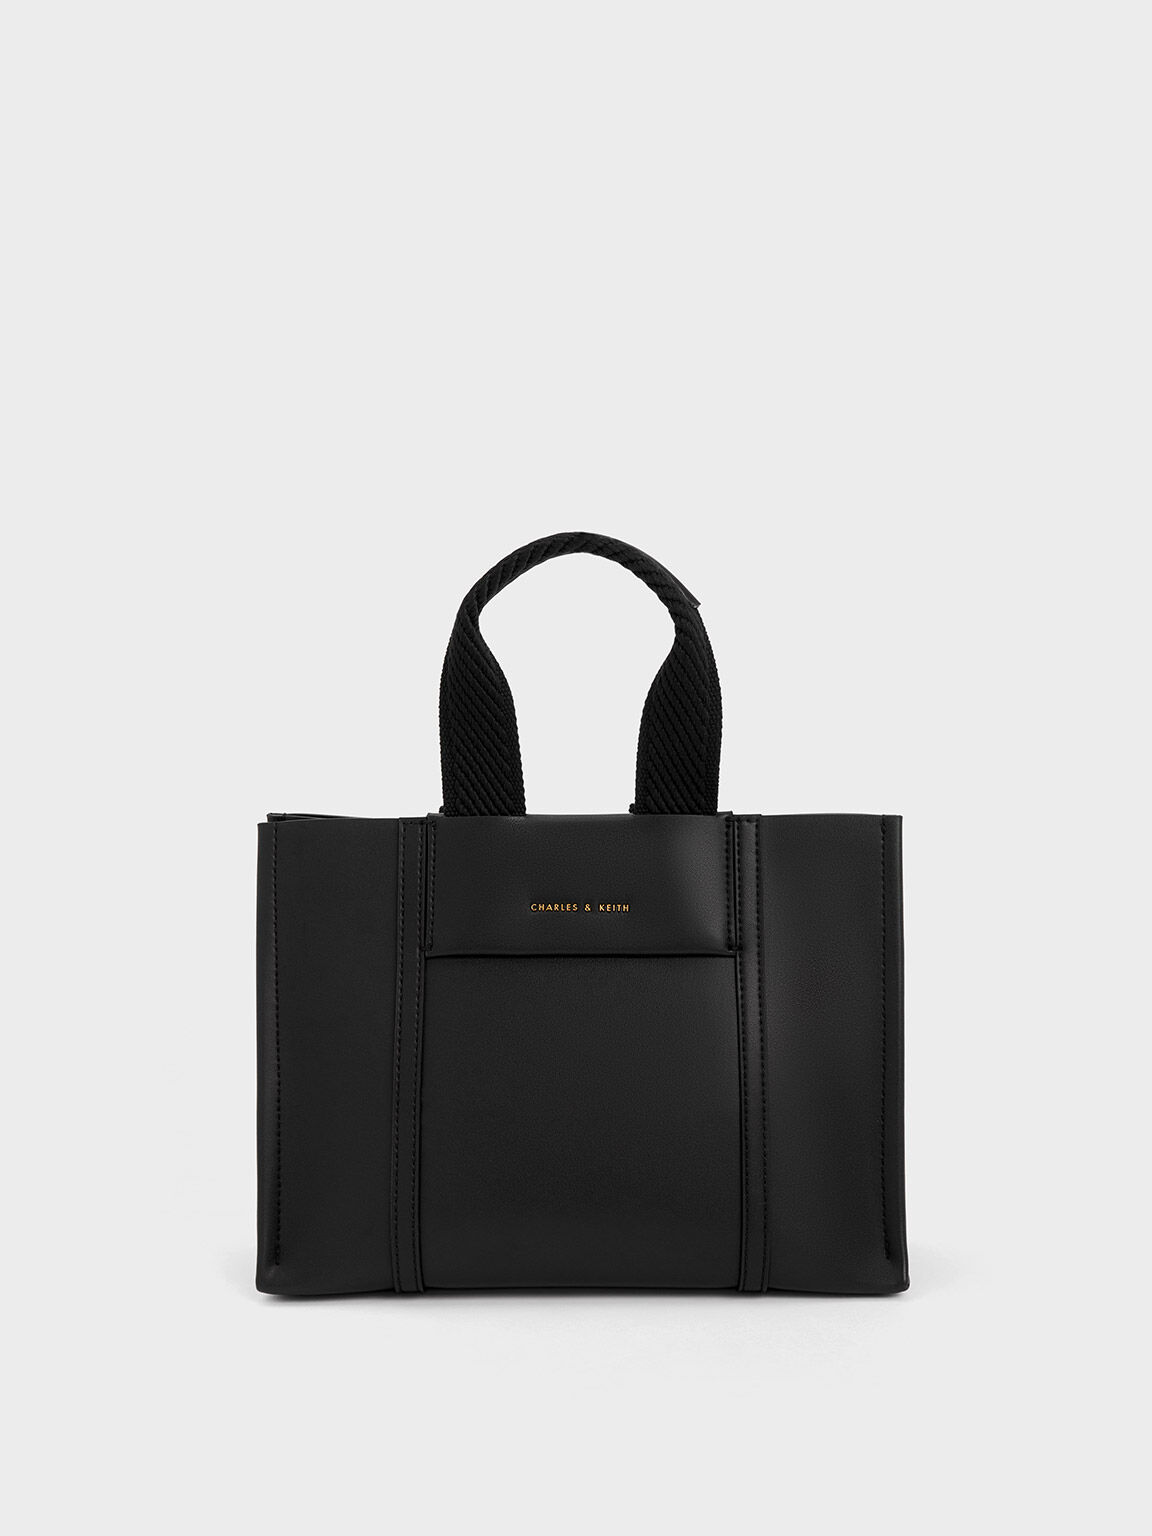 MY CHARLES & KEITH BAG COLLECTION - TOP 10 BAGS